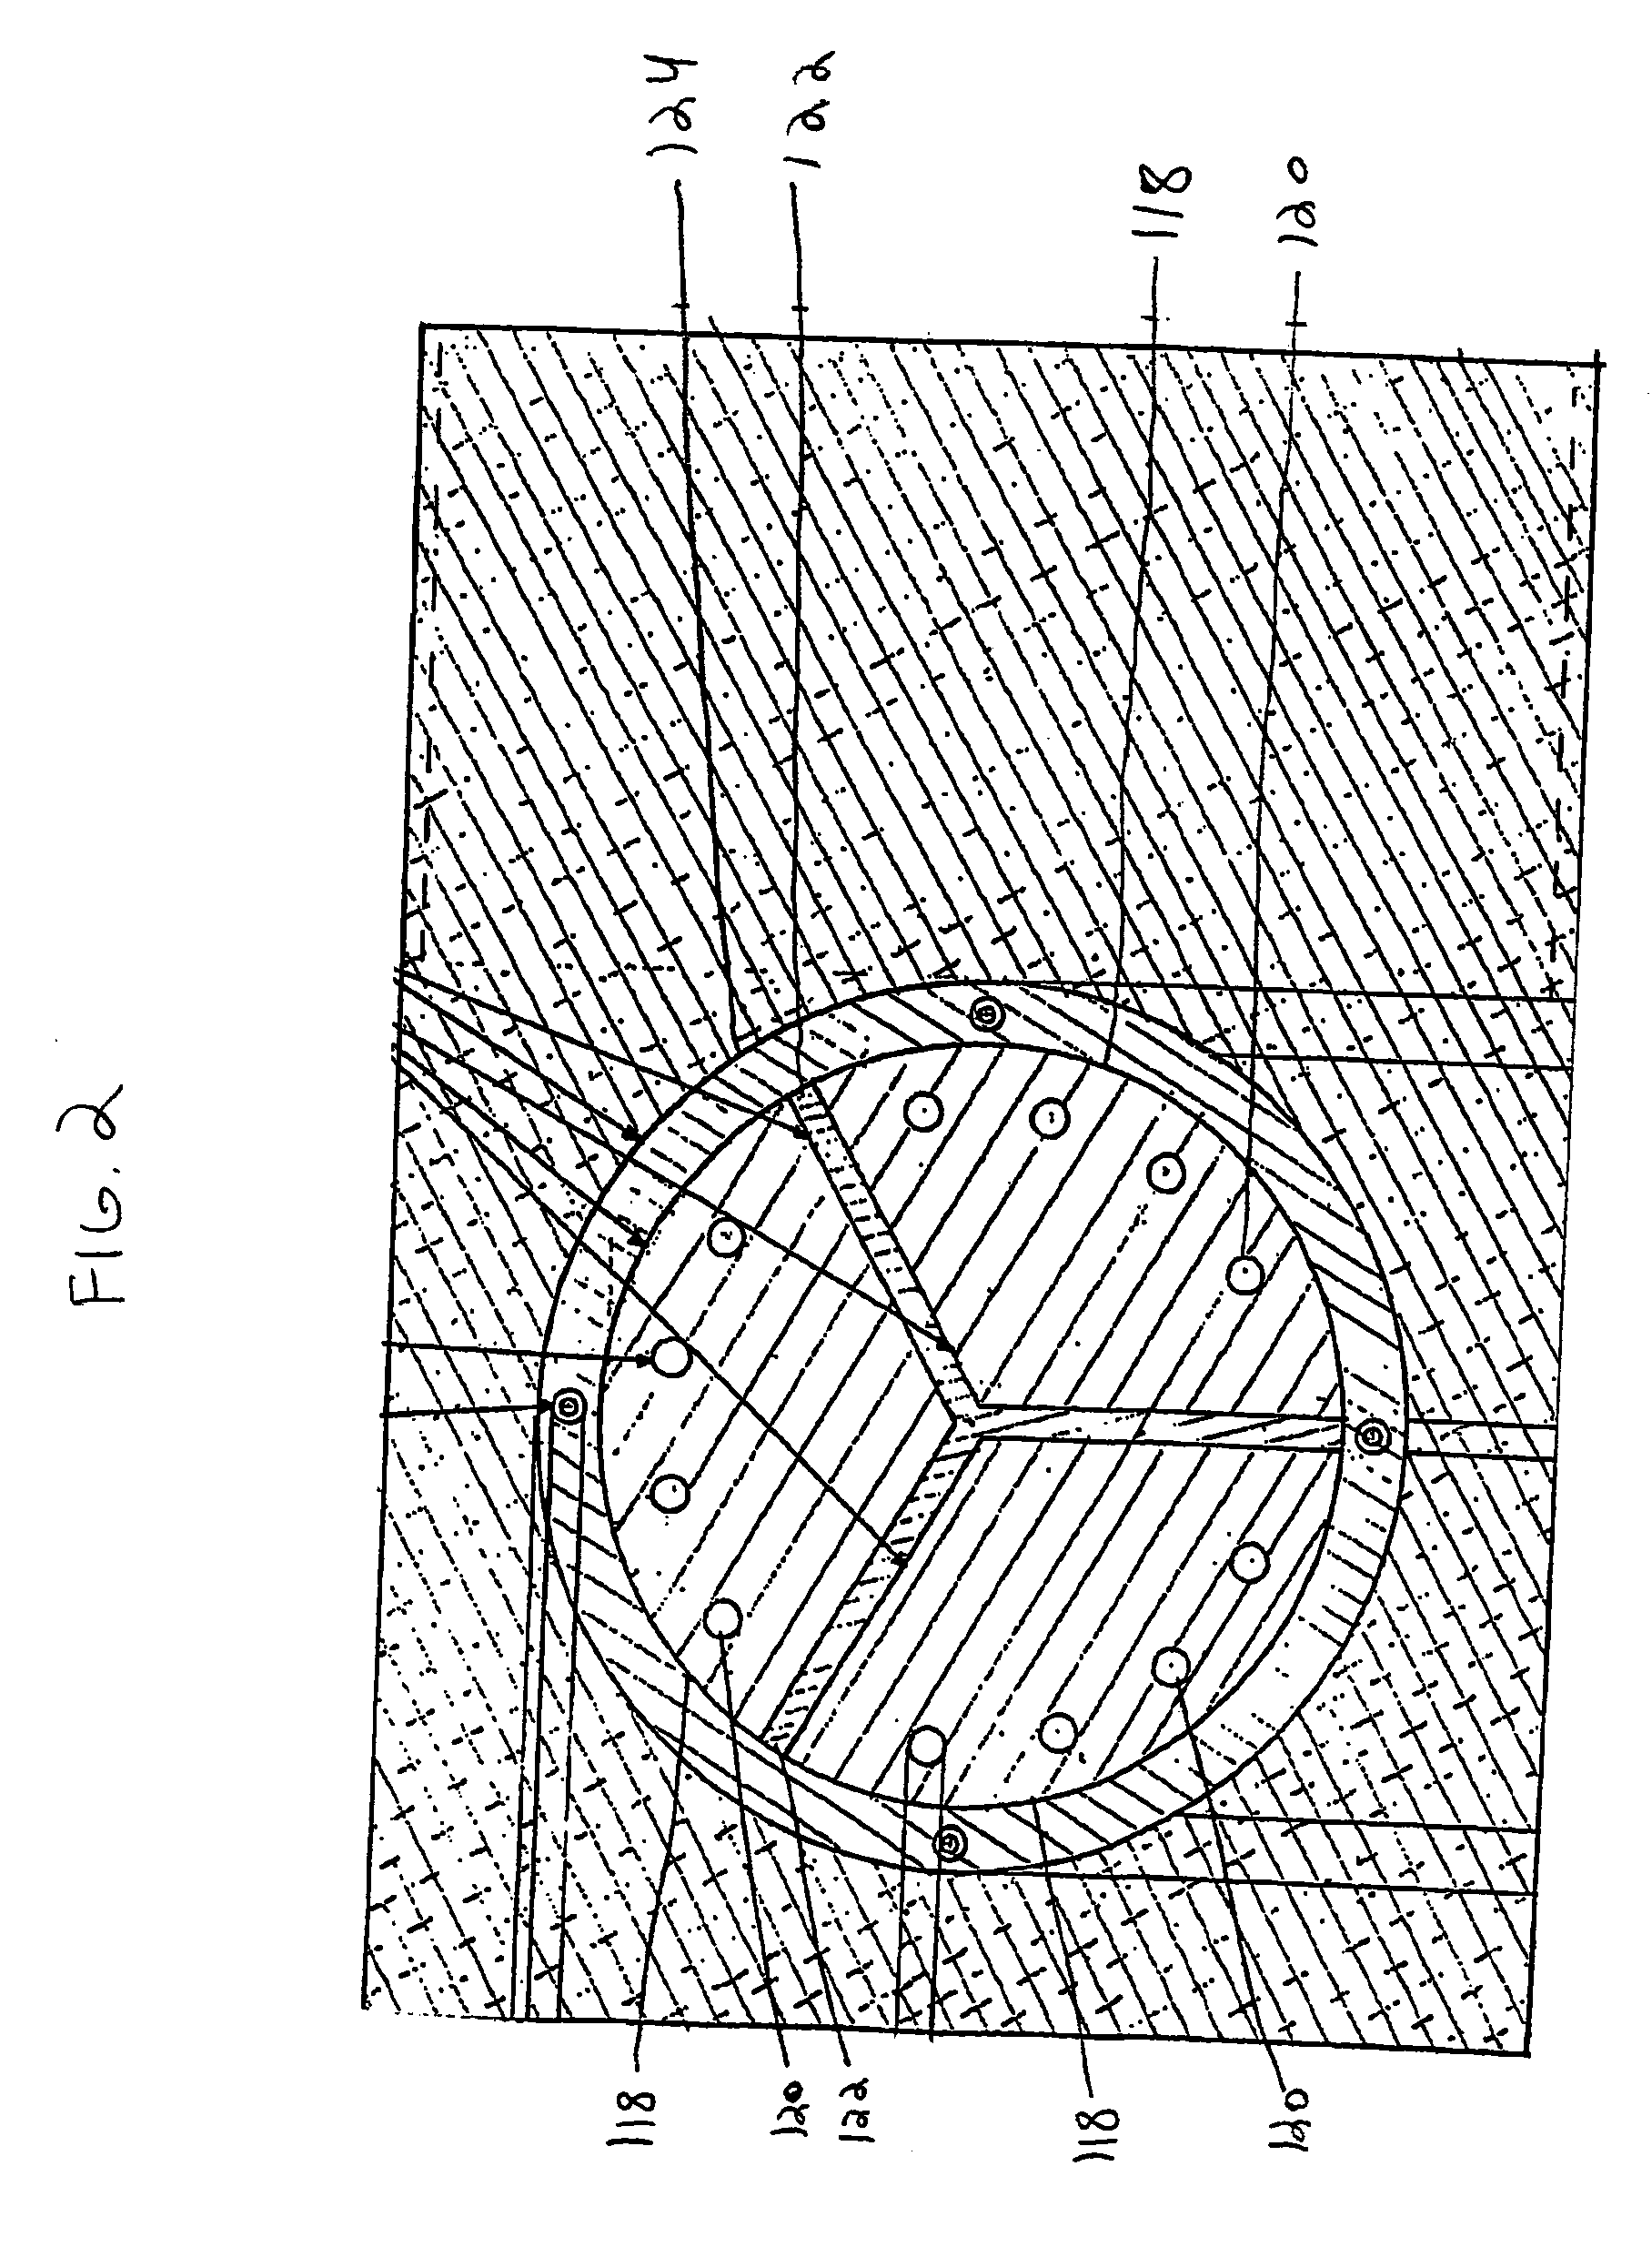 Apparatus and method for a continuous rapid thermal cycle system